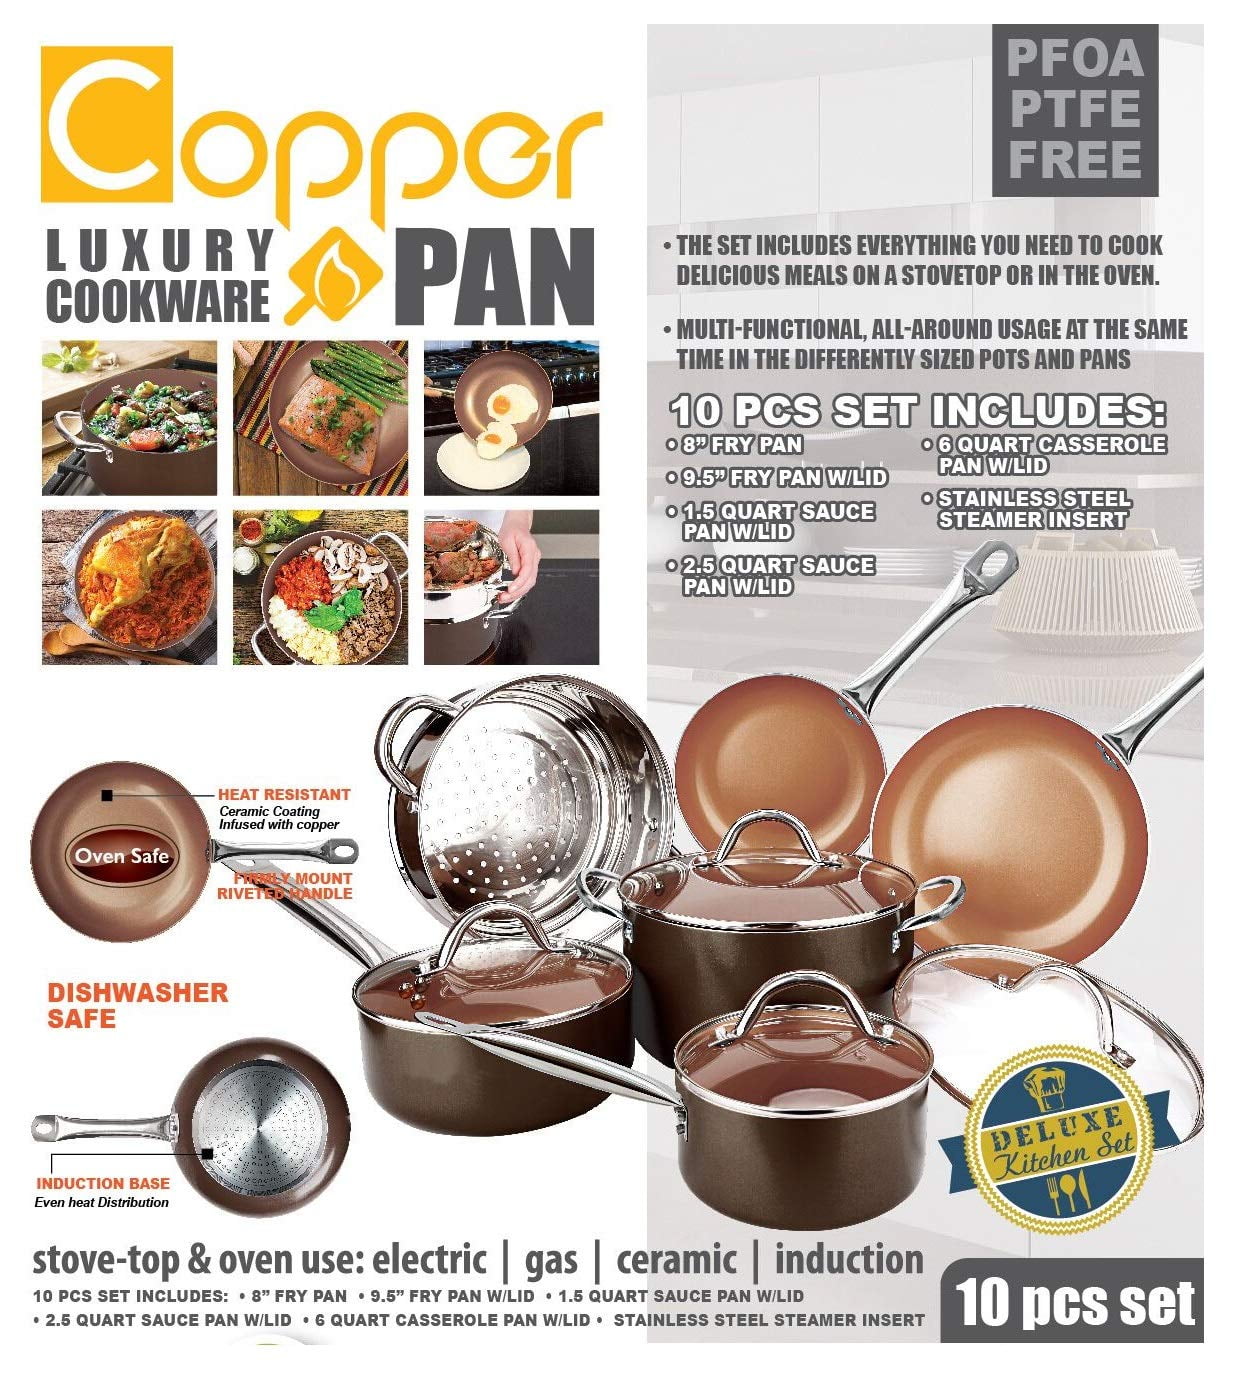 NutriChef Kitchenware Pots and Pans Luxury Kitchen Cookware Set, 3 Layers  Copper Non-Stick Coating Inside NCCWALN14.5 - The Home Depot